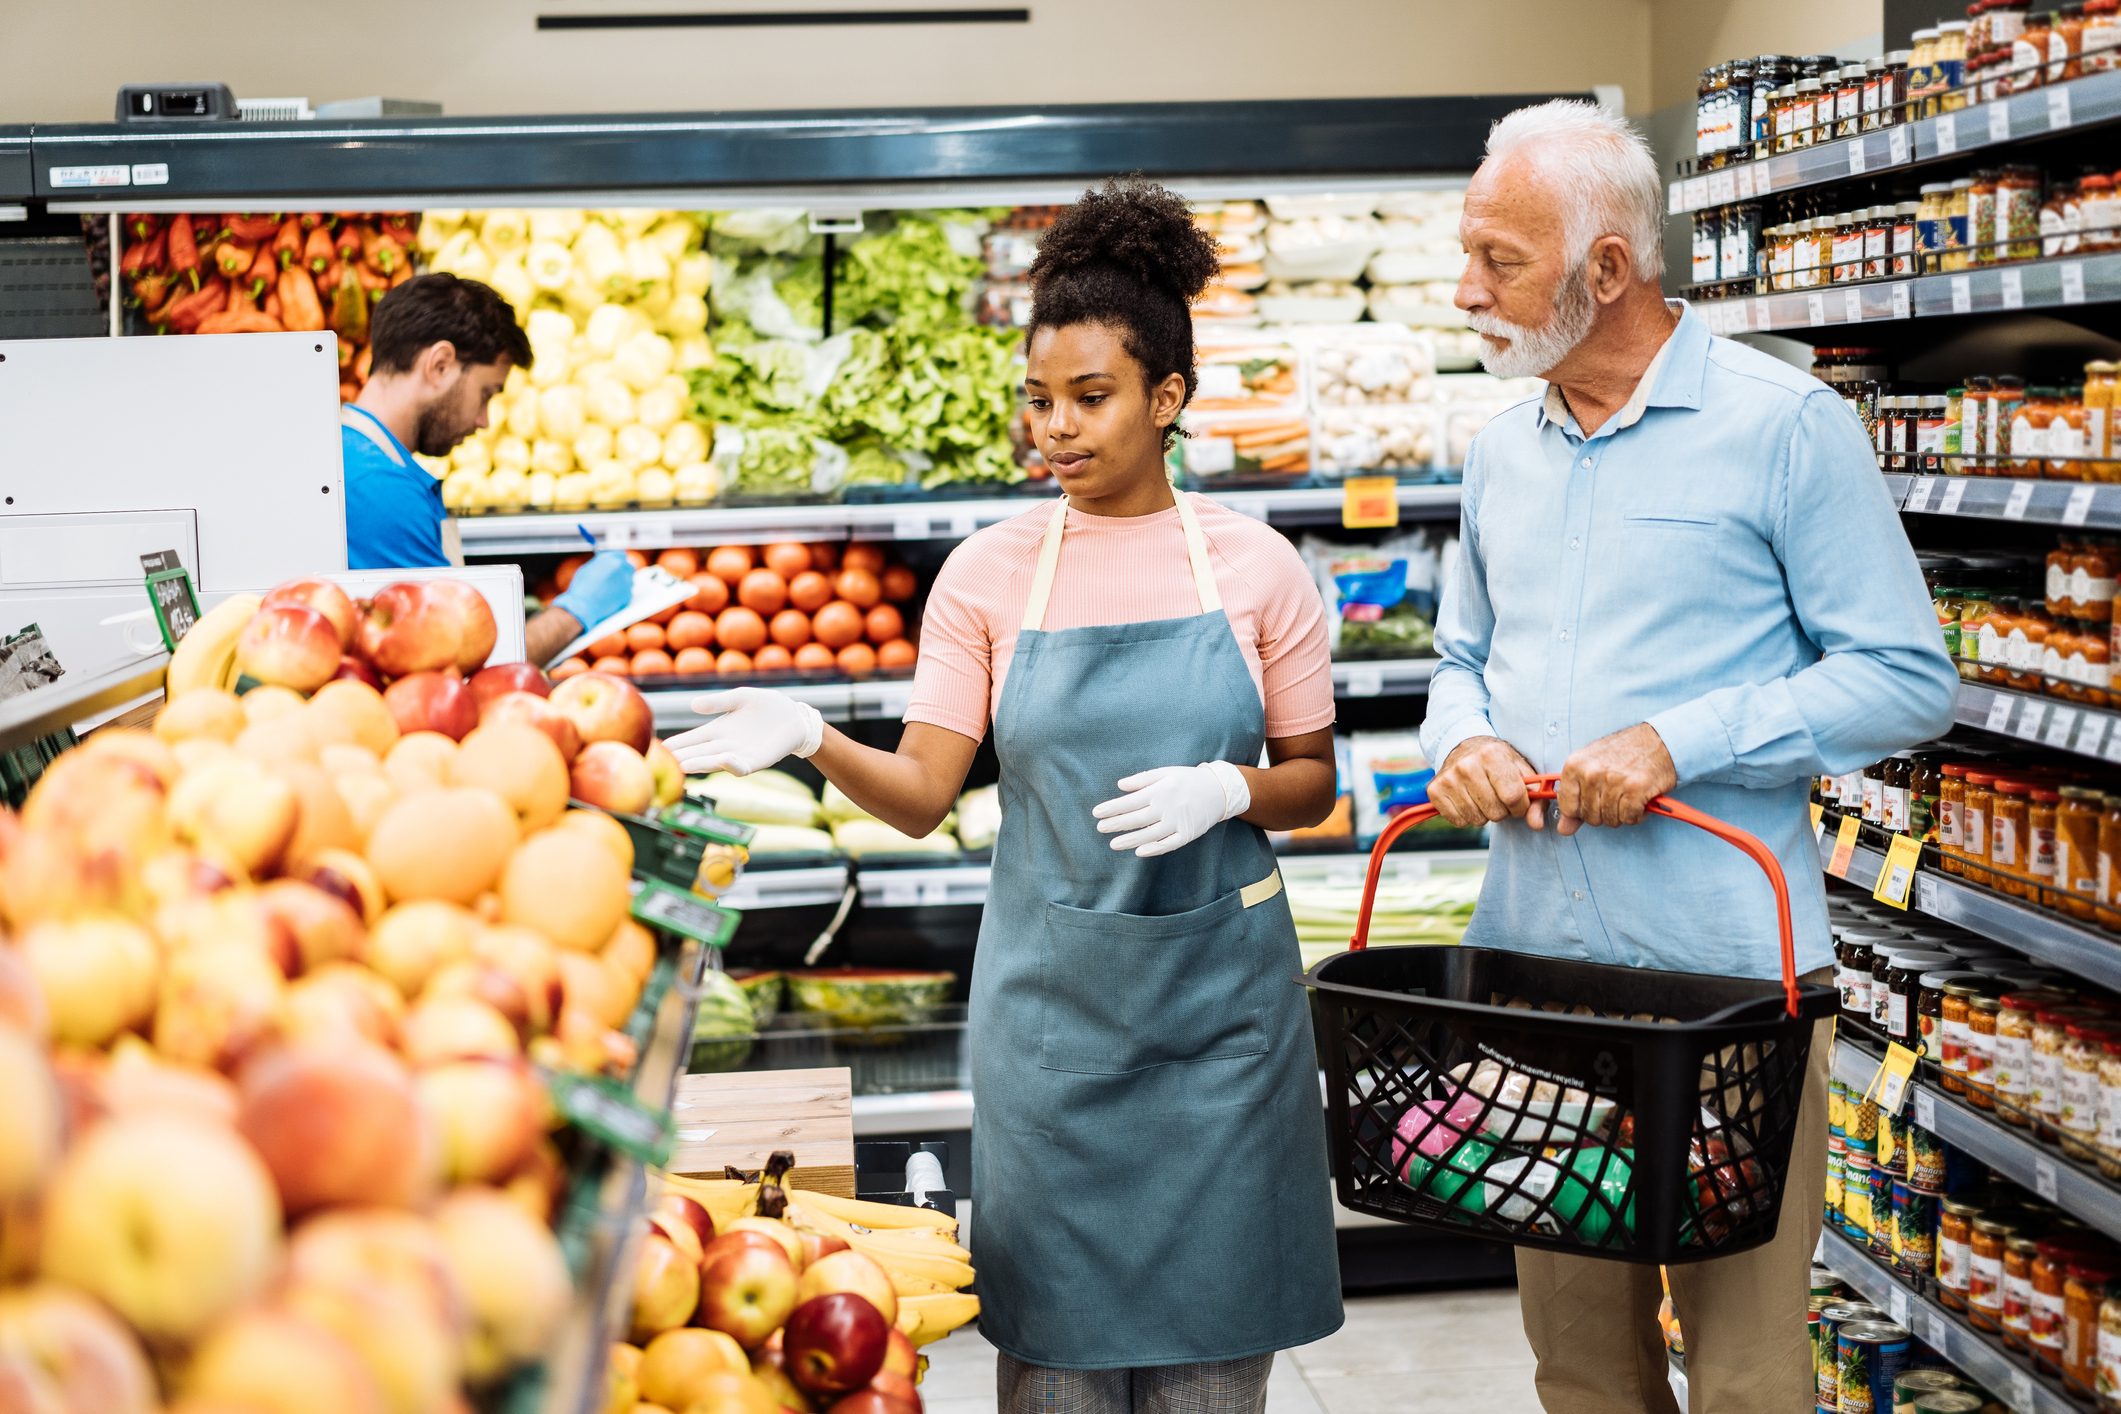 American employee in supermarket assisting senior customer while buying fruits and vegetables